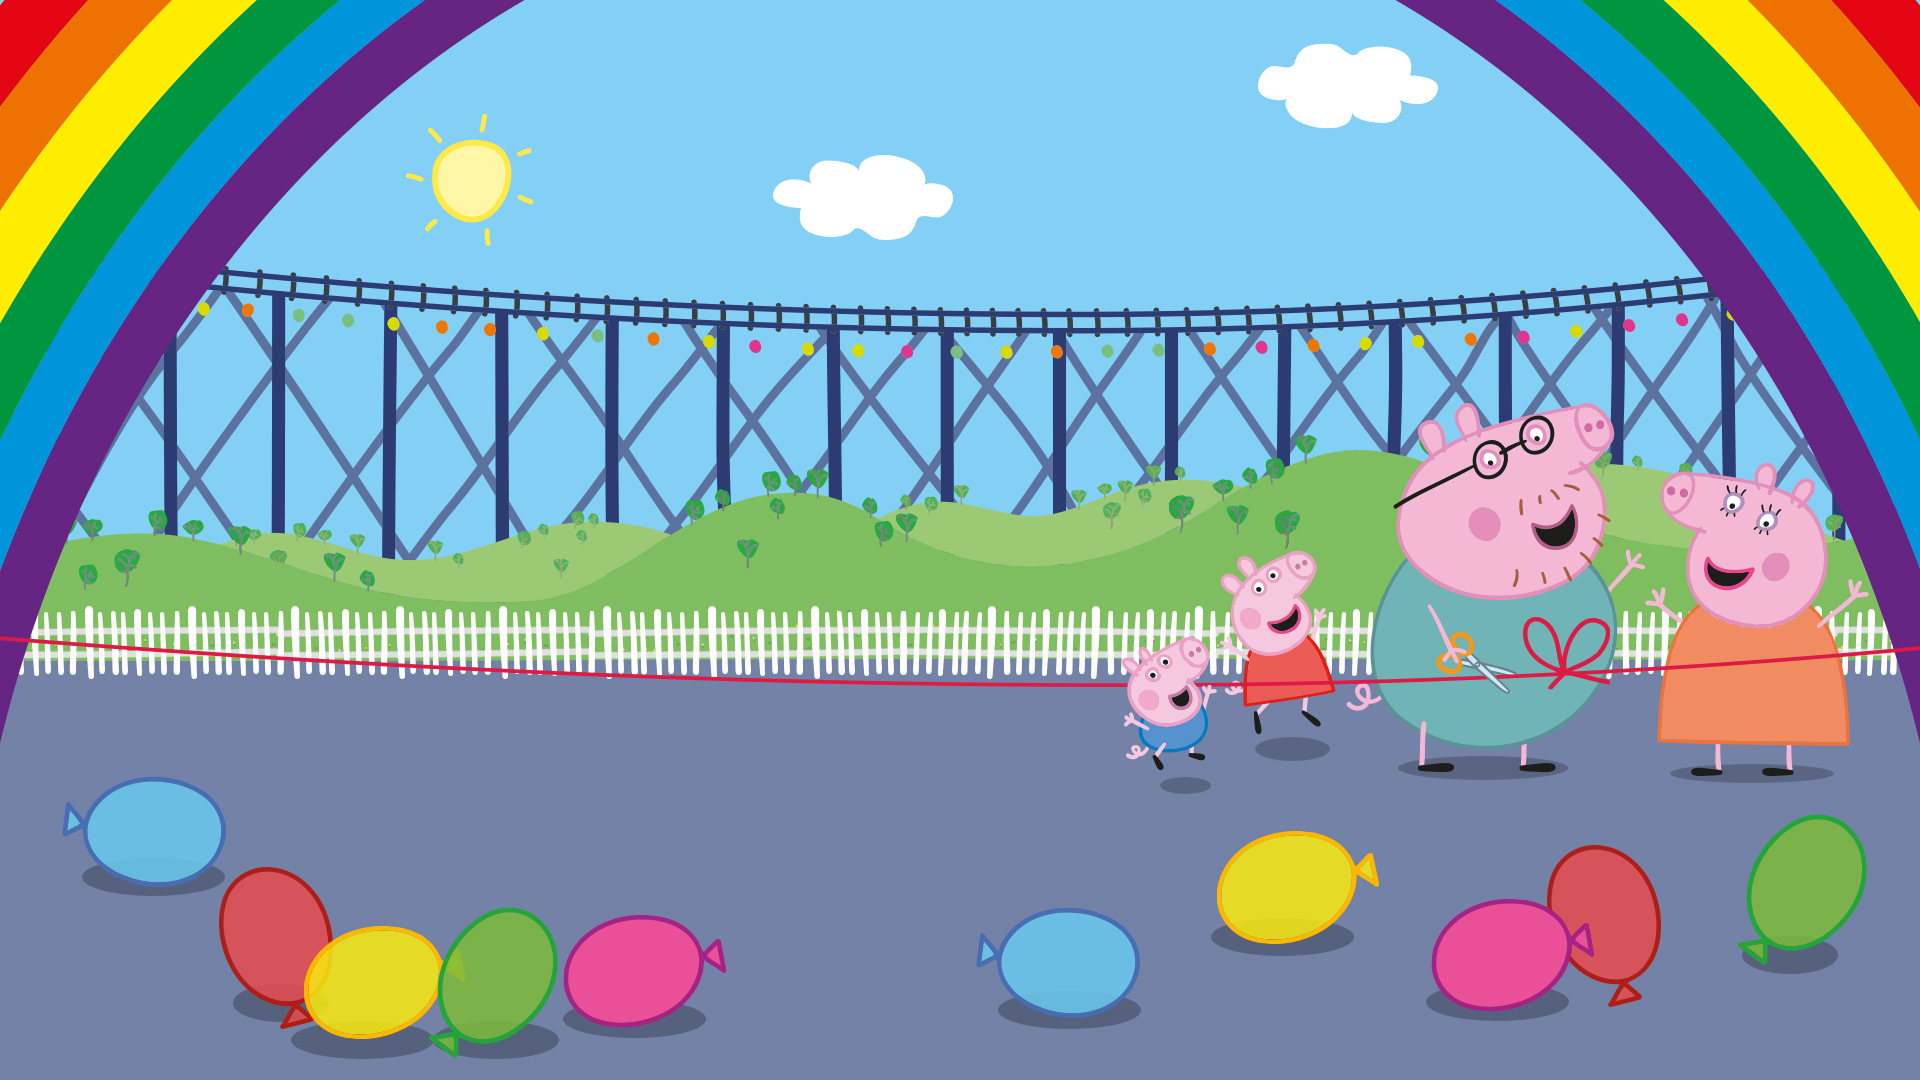 Peppa Pig Theme Park  Guide to Attractions, Shows & Tickets